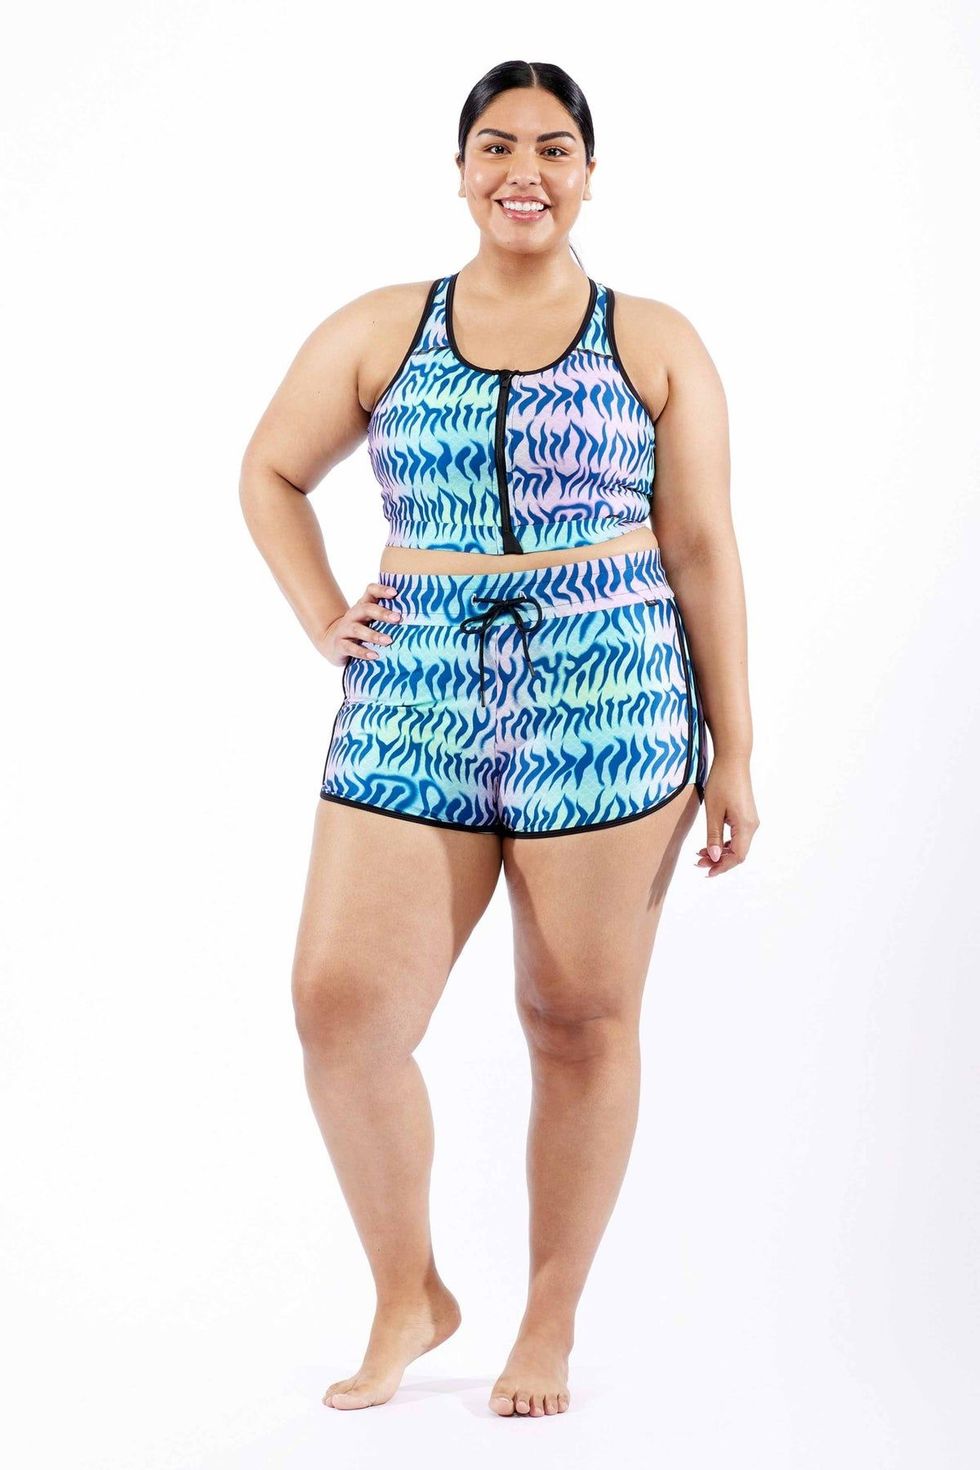 10 Gender-Neutral Swimsuits To Slay This Summer